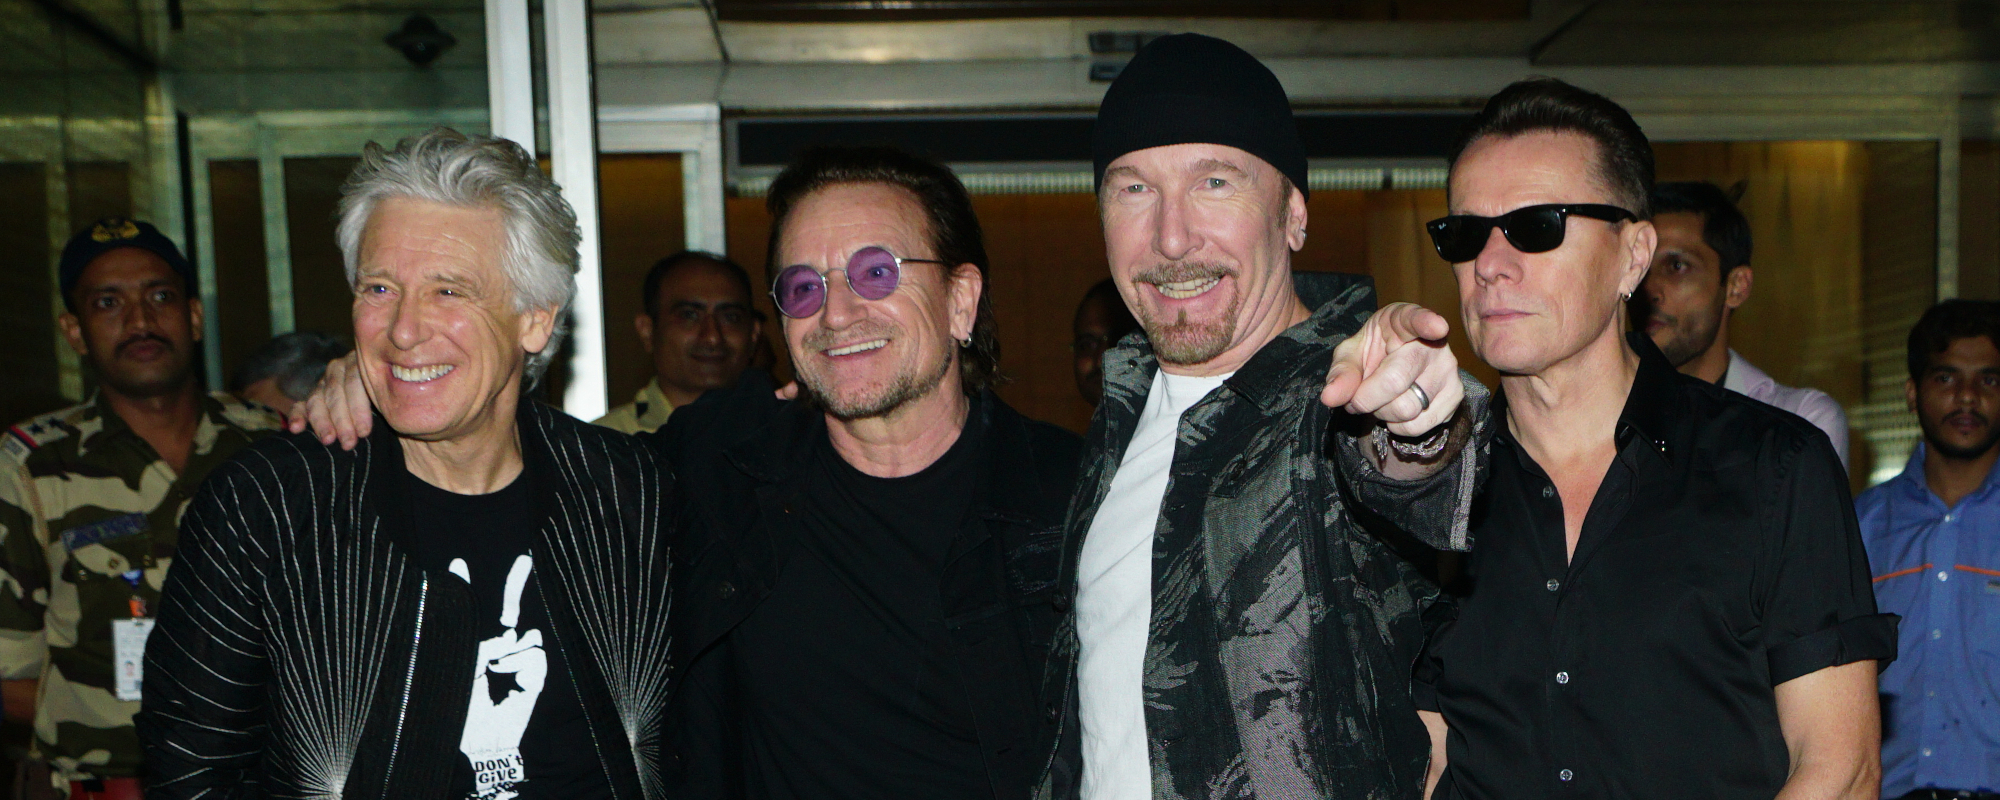 Watch: Trailer for U2 Documentary ‘A Sort Of Homecoming’